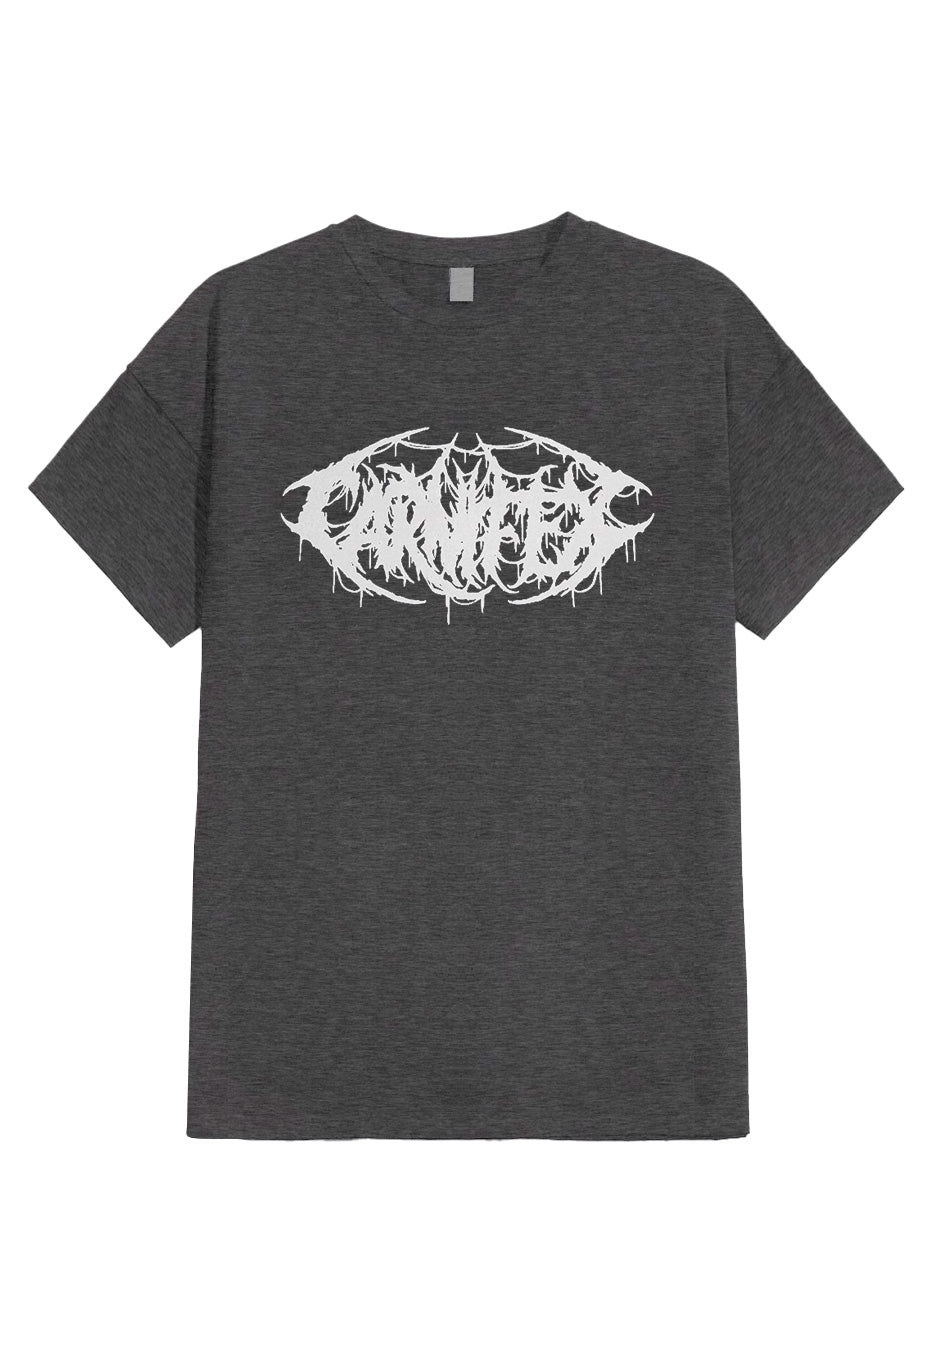 Carnifex - Rest In Pain Graphite Heather - T-Shirt